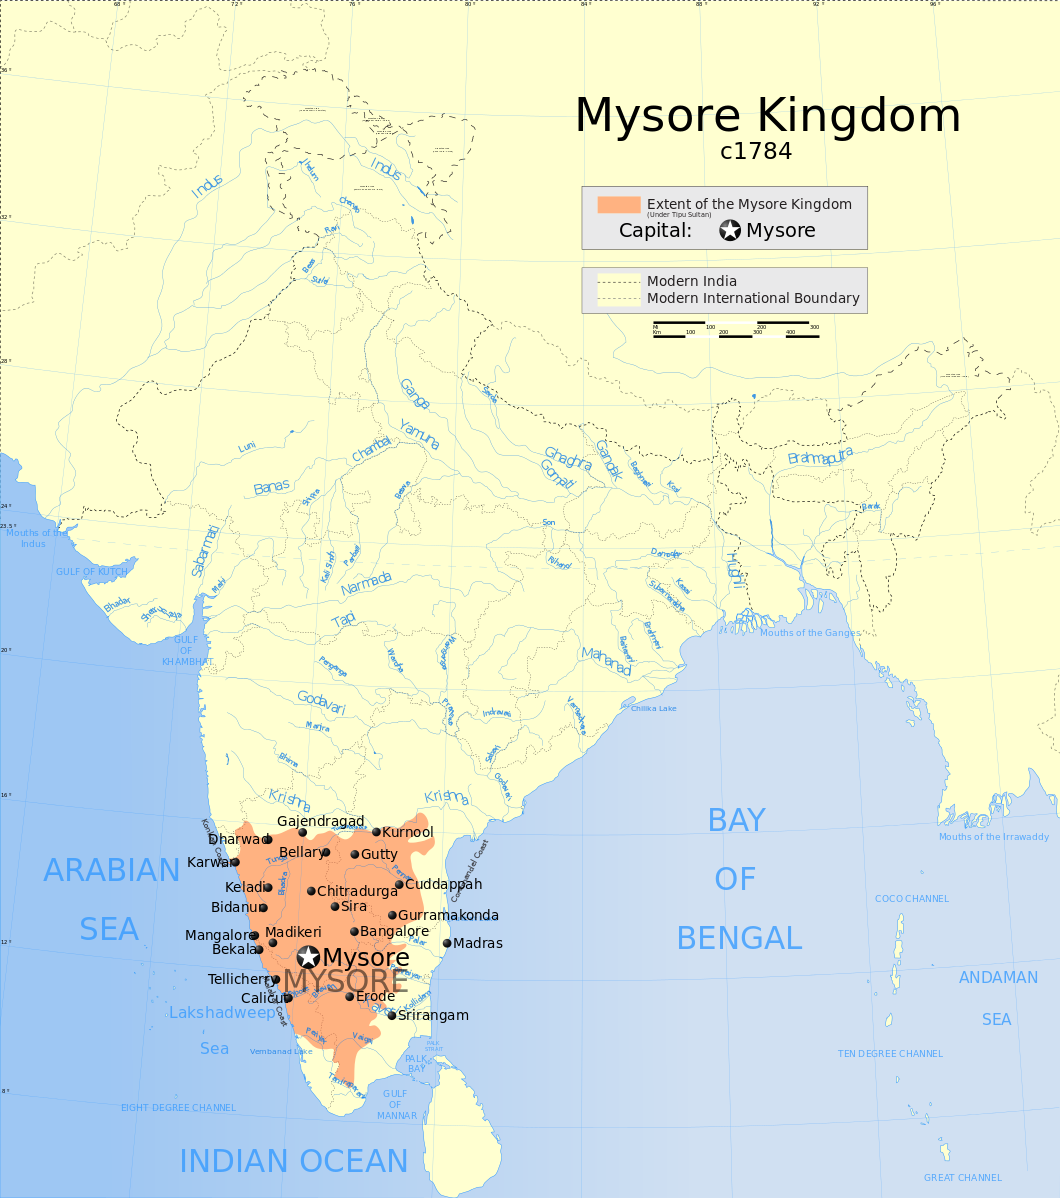 Map of India, highlighting the Mysore Kingdom in the South. 